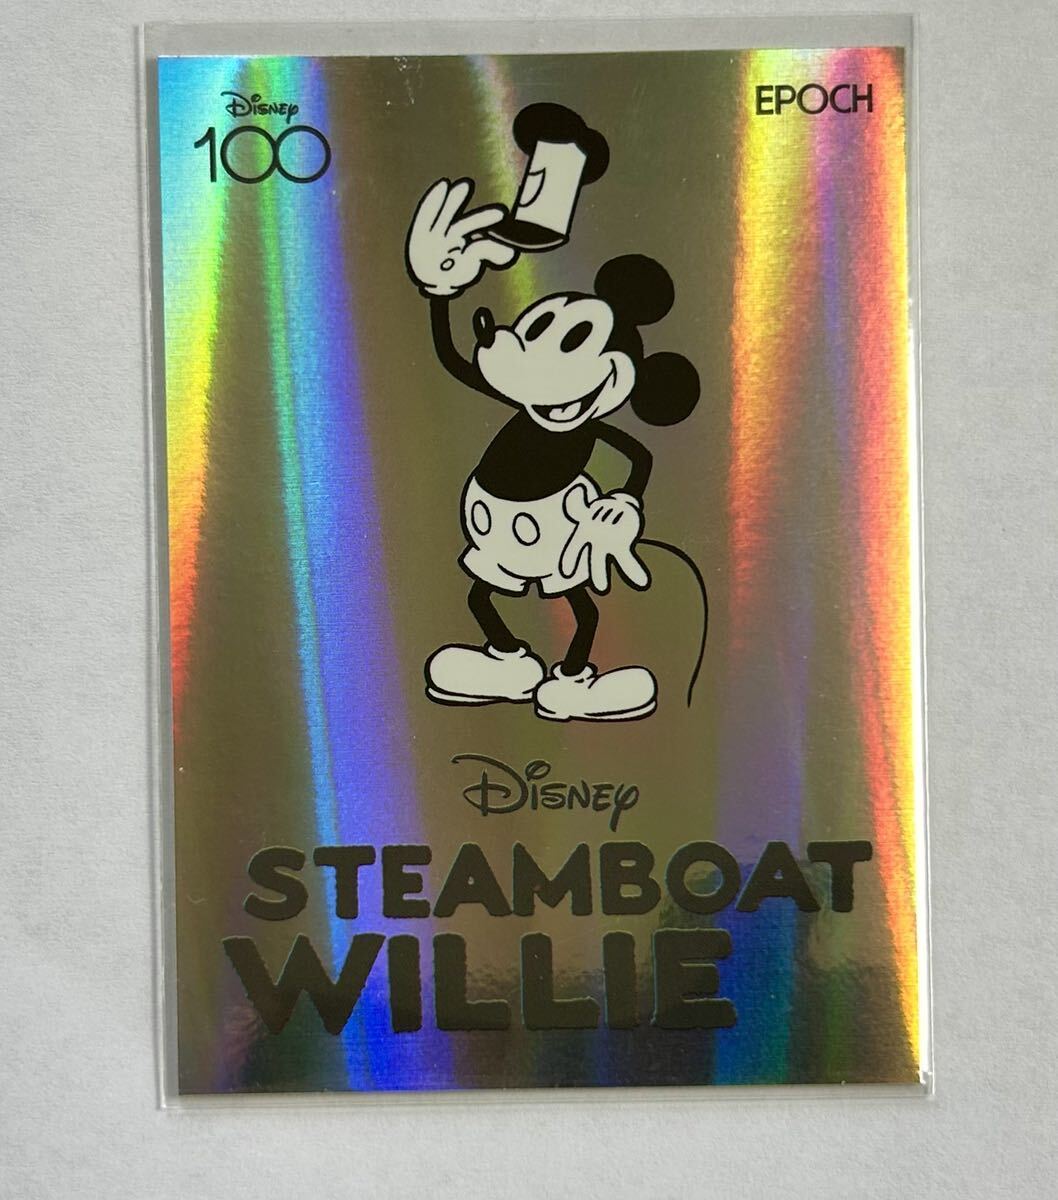 75 sheets limitation 2023 EPOCH DISNEY PREMIER 100 anniversary Mickey Mouse STEAMBOAT WILLIE insert MICKEY MOUSE Epo kSW-02